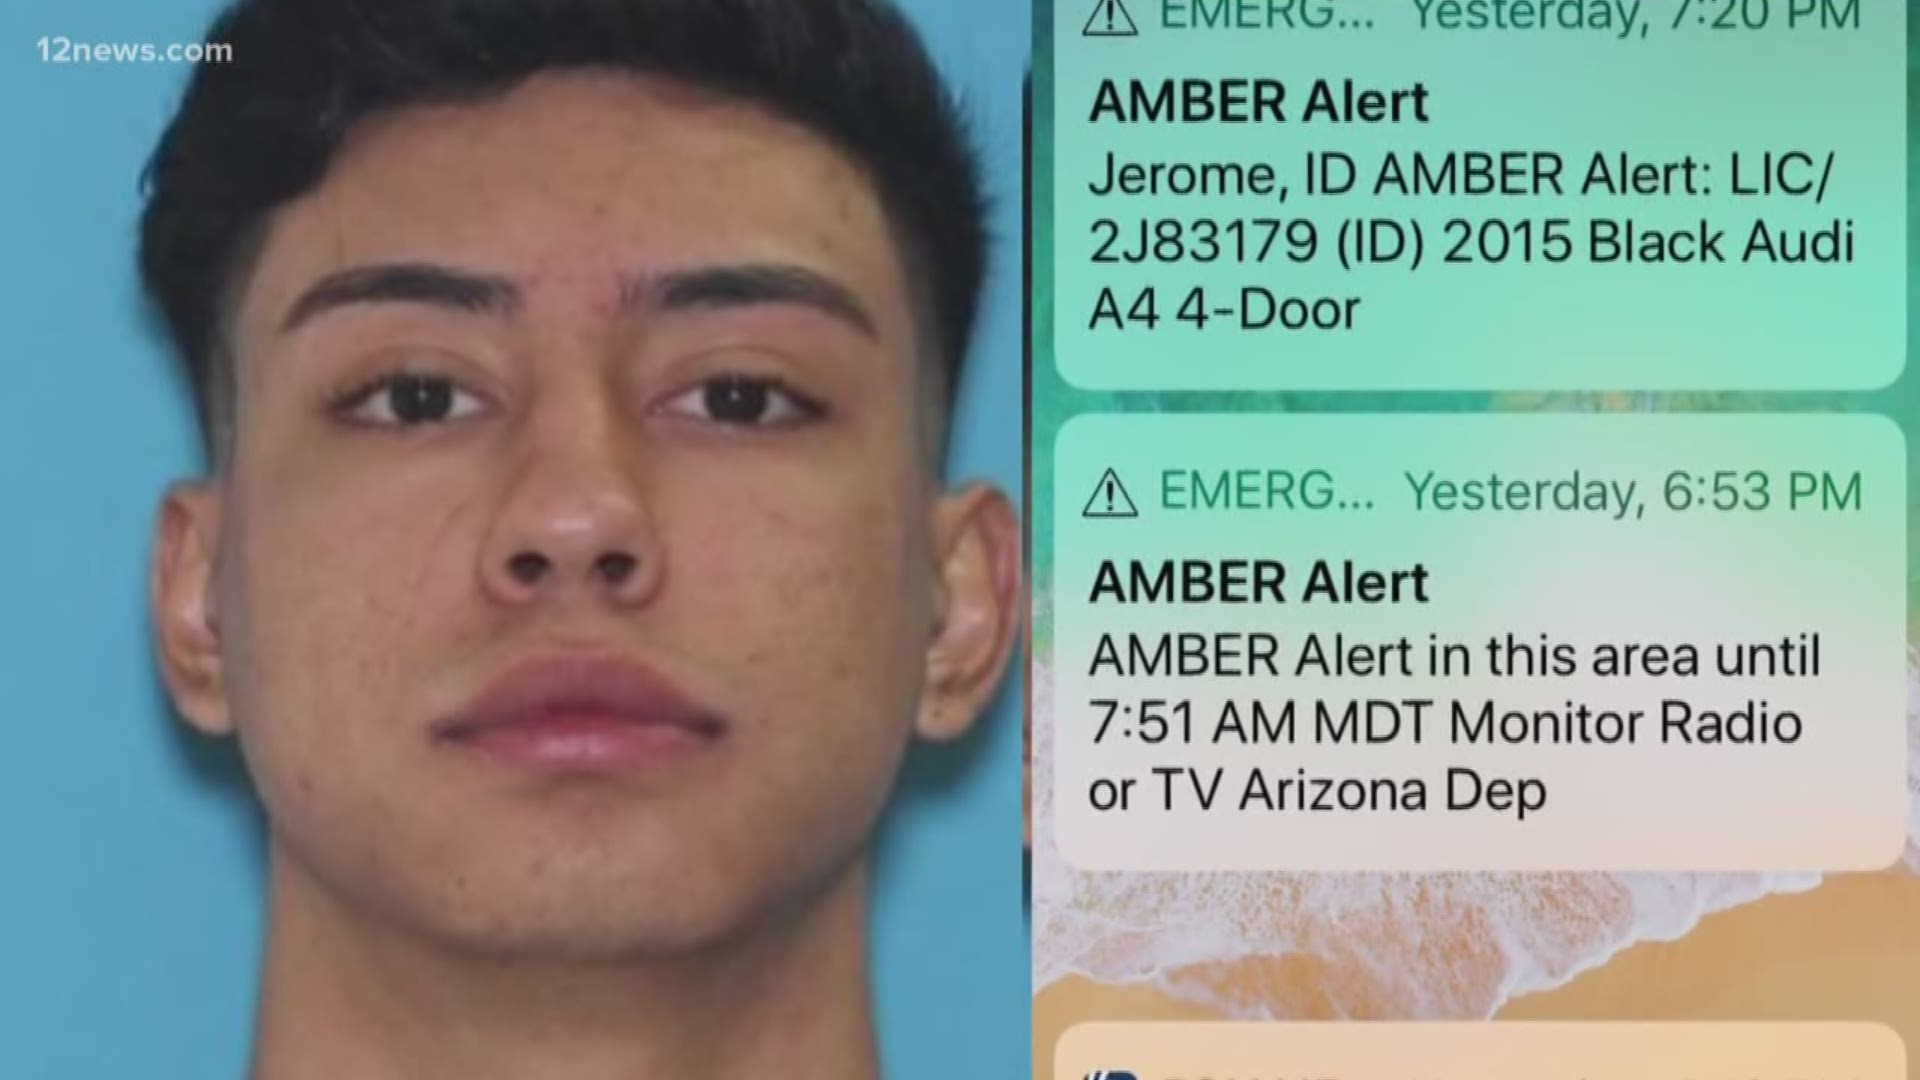 A 17-year-old Idaho teen was kidnapped by her ex-boyfriend, 18-year-old Miguel Rodriguez-Perez. Both were found early Tuesday morning. The victim's family tells 12 News they are relieved she has been found safe.